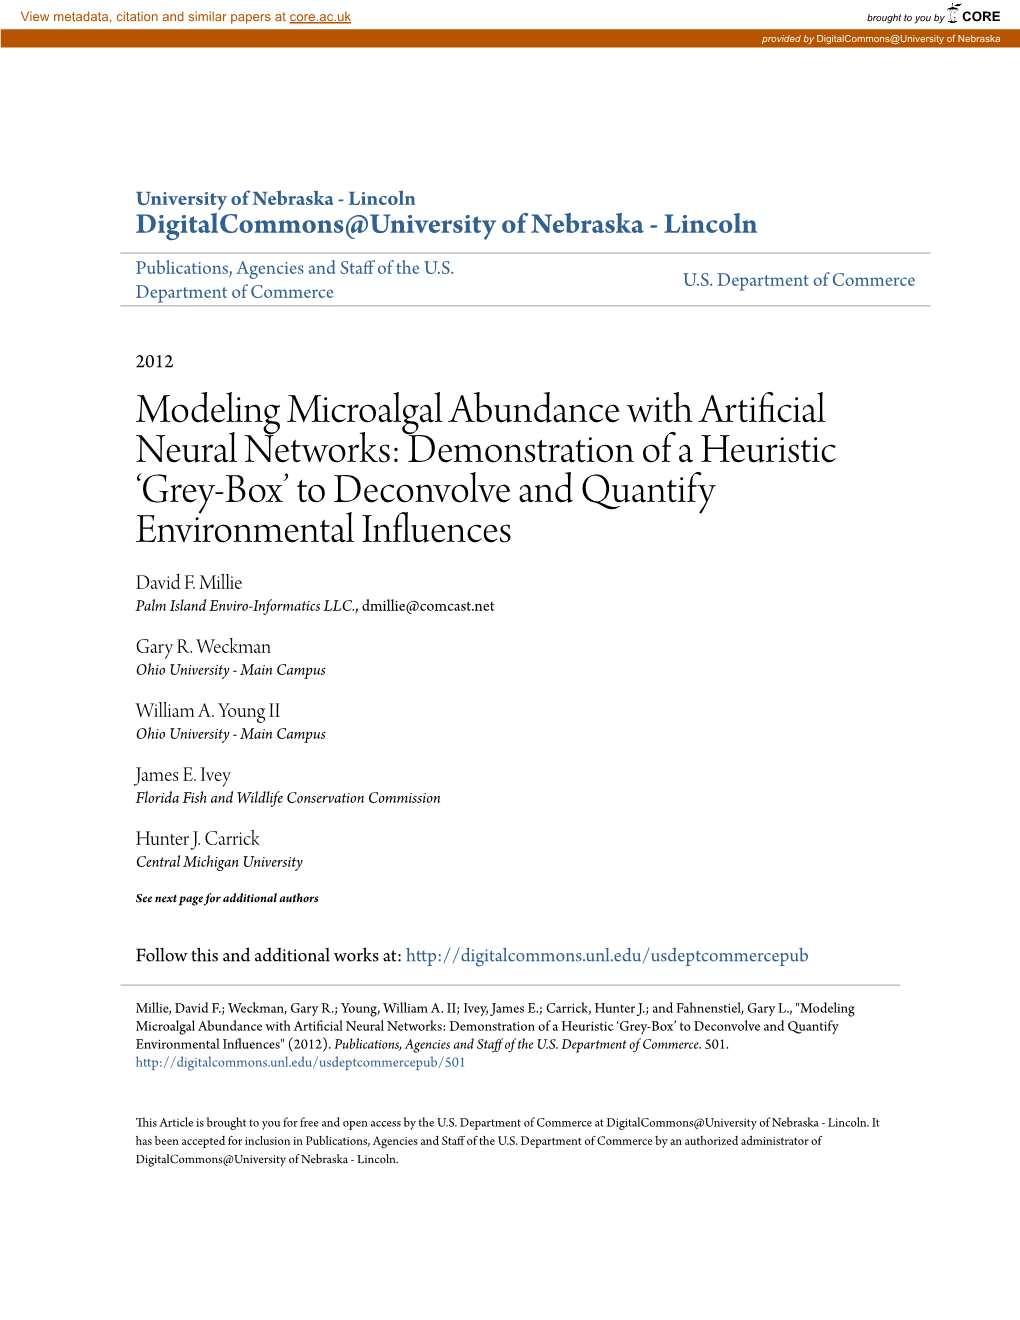 Modeling Microalgal Abundance with Artificial Neural Networks: Demonstration of a Heuristic 'Grey-Box' to Deconvolve And